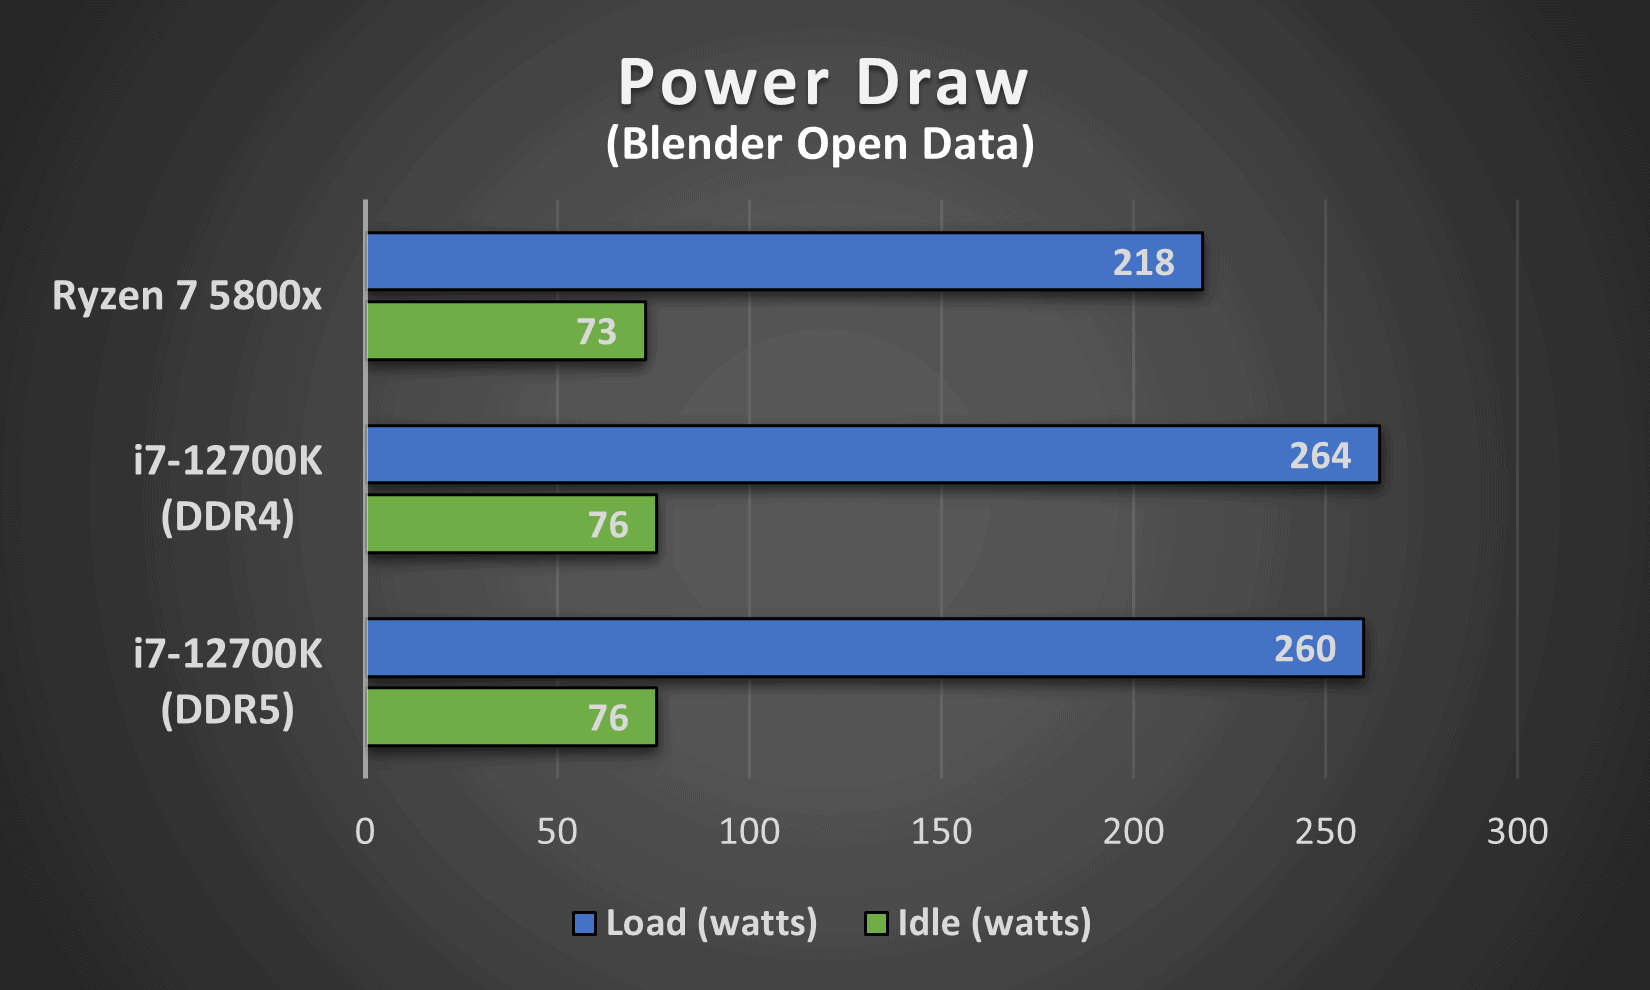 This image compares the power consumption at idle and under-load between the i7 12700K (DDR4 and DDR5) and AMD's Ryzen 7 5800x